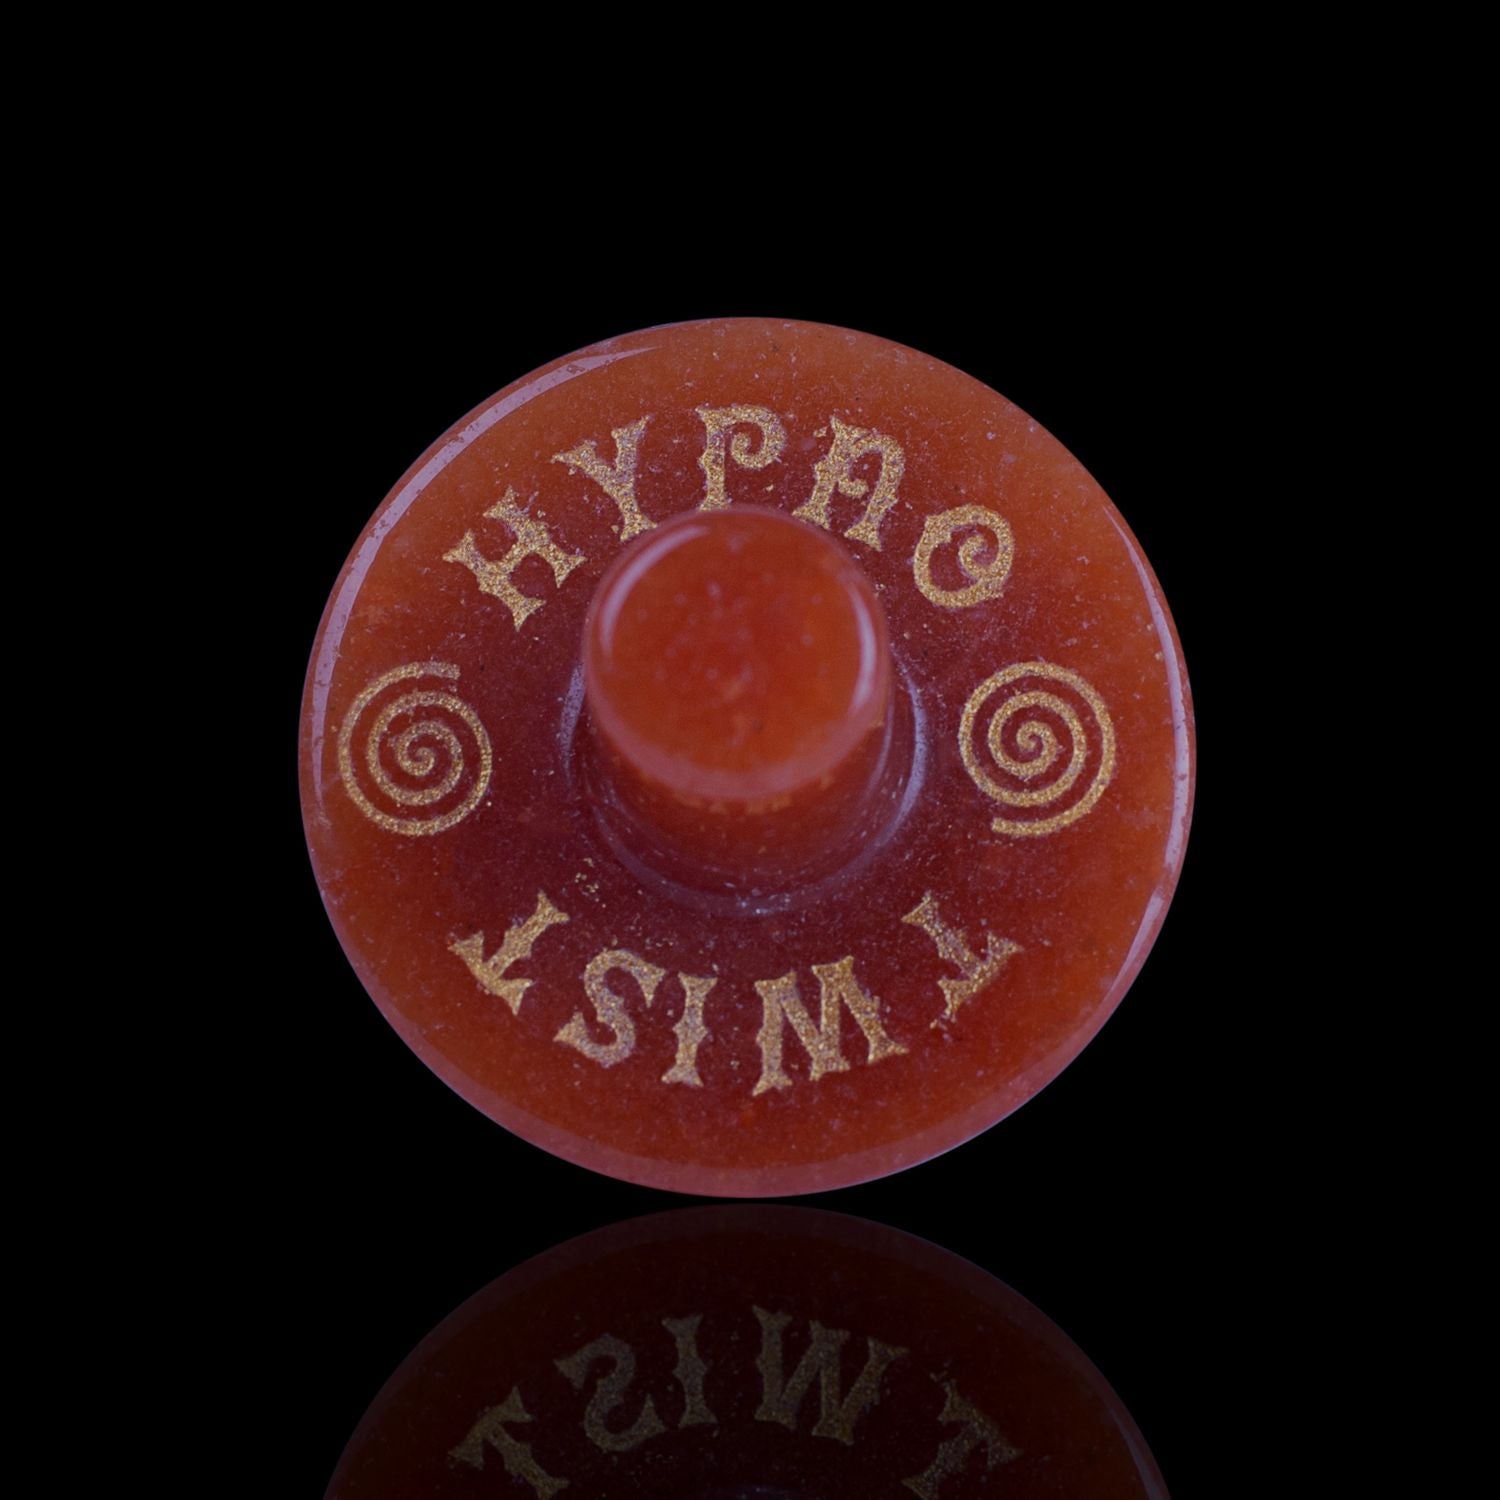 Front View Of The Naturally Wicked Exclusive Hypnotwister. An Orange Aventurine Crystal Spinning Top Engraved With Hypno Twist